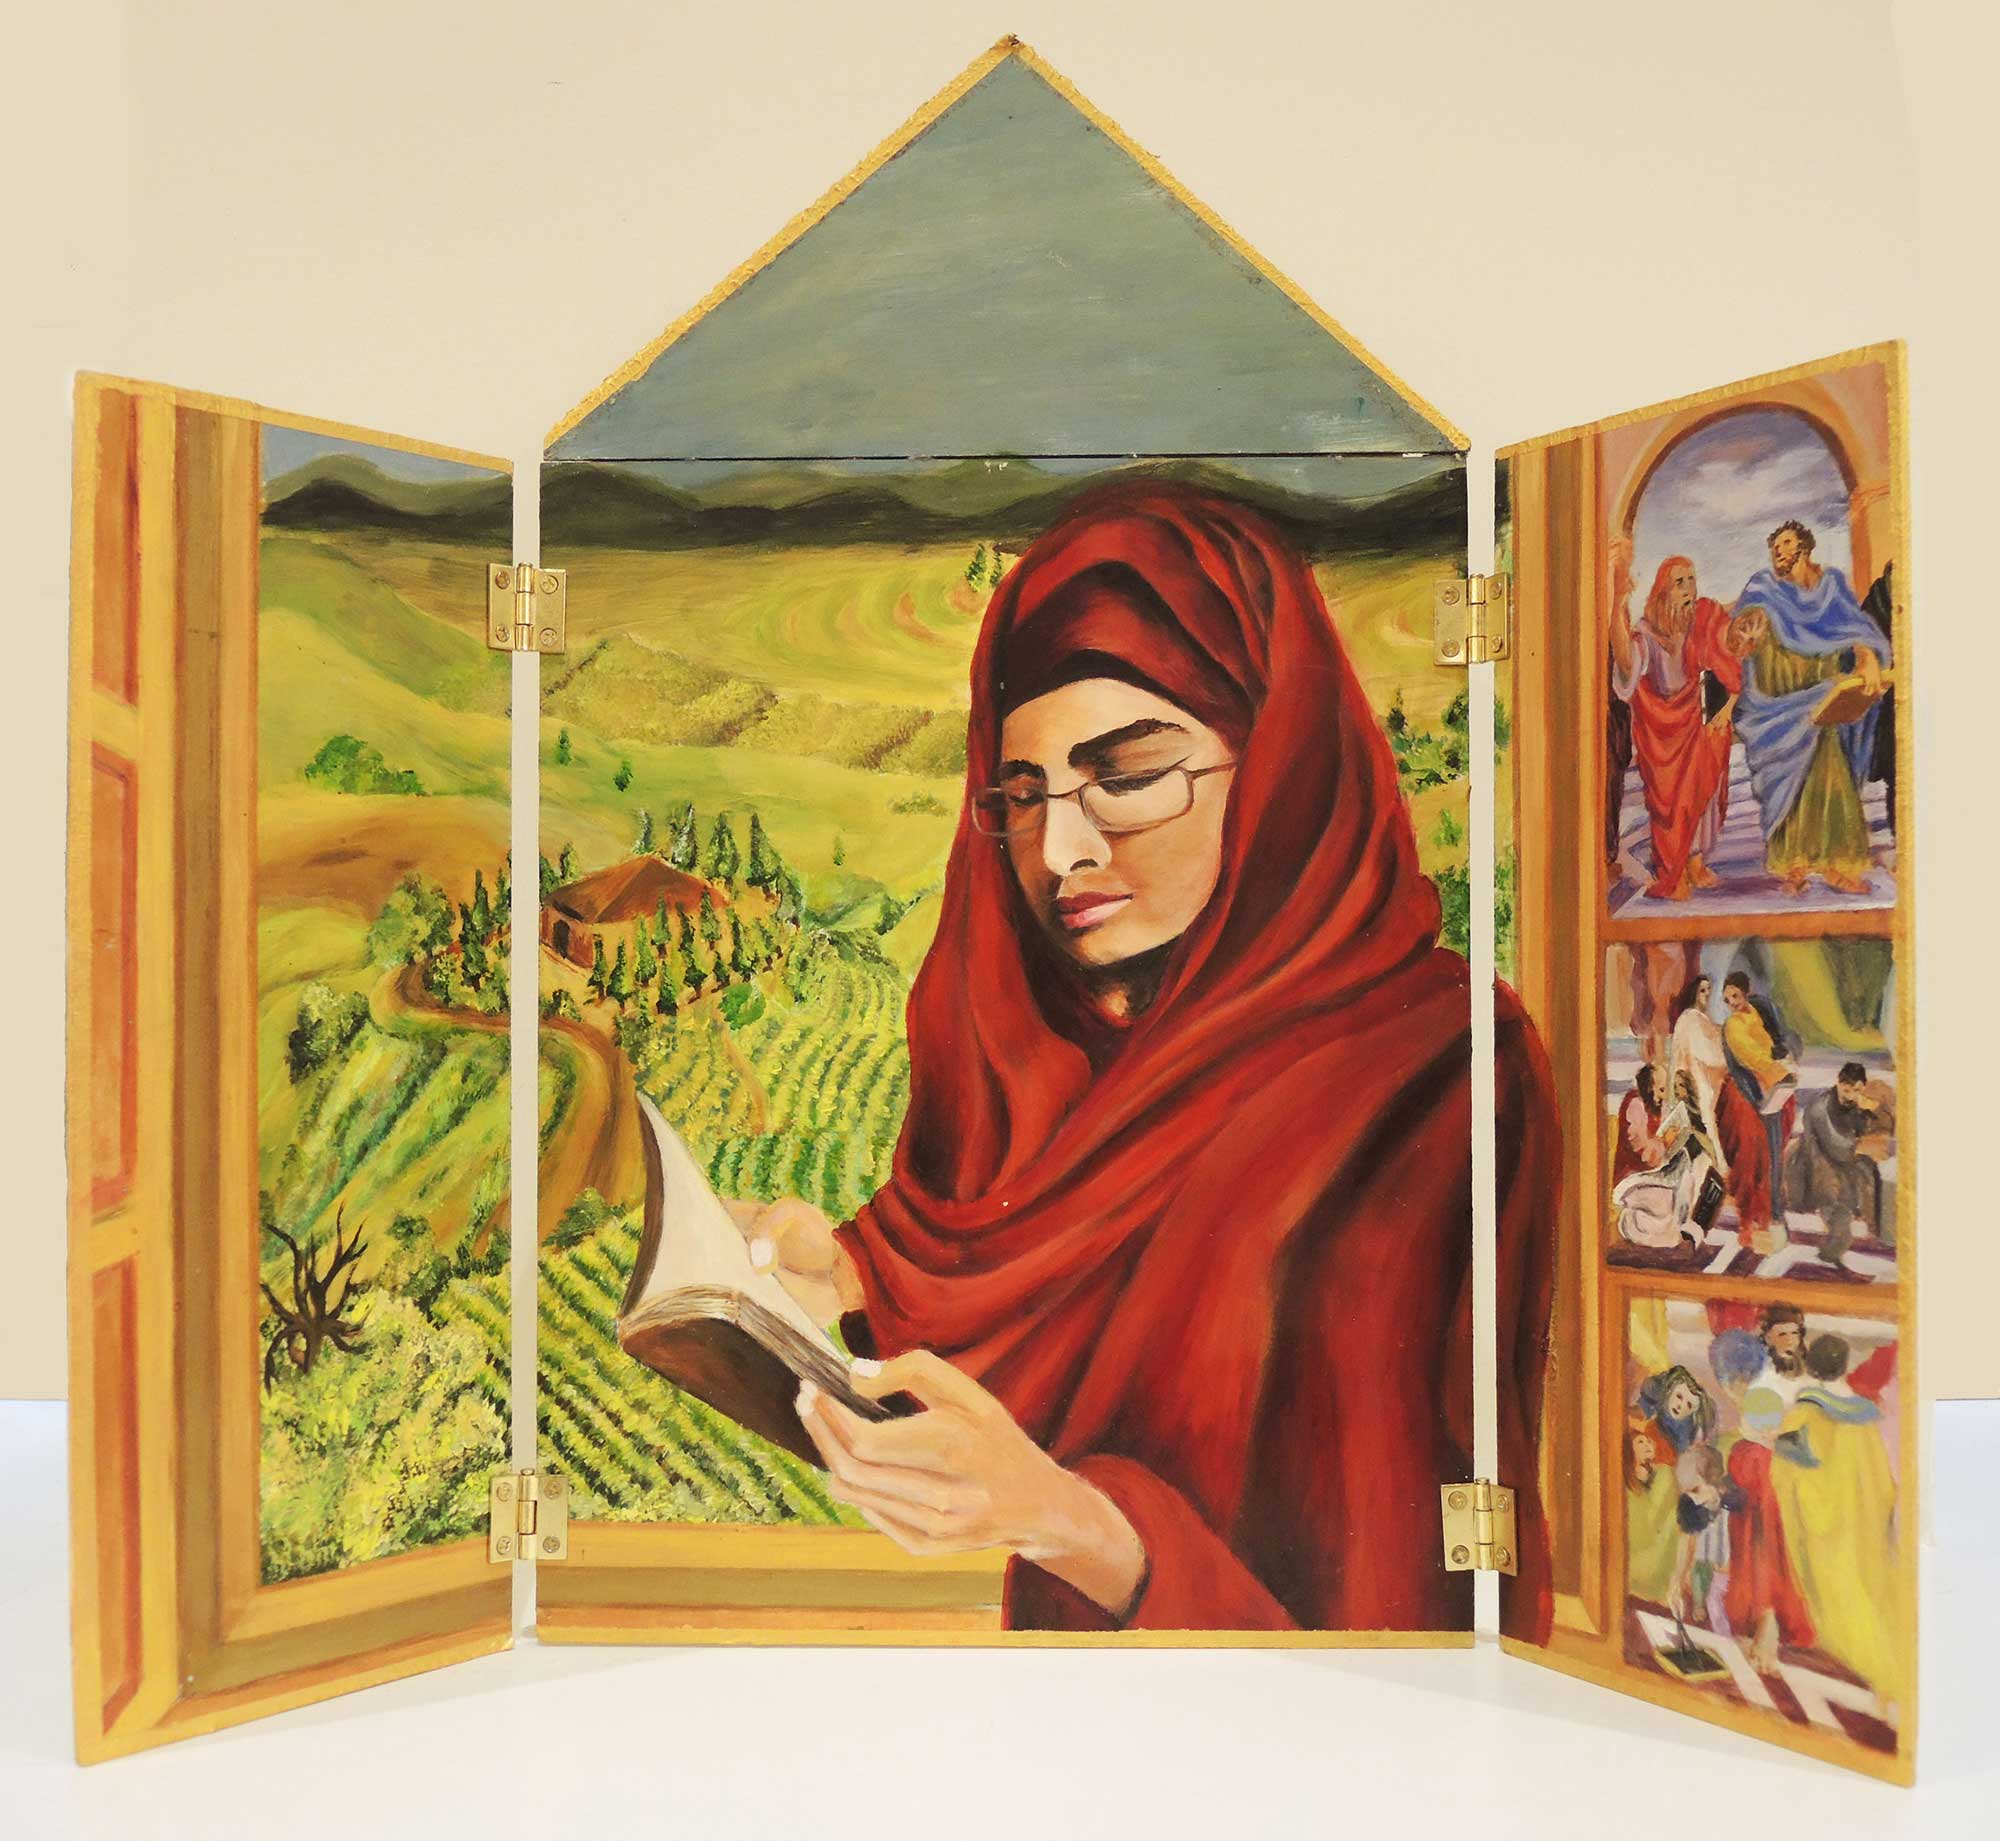 A painting on a tri-fold panel containing a woman reading